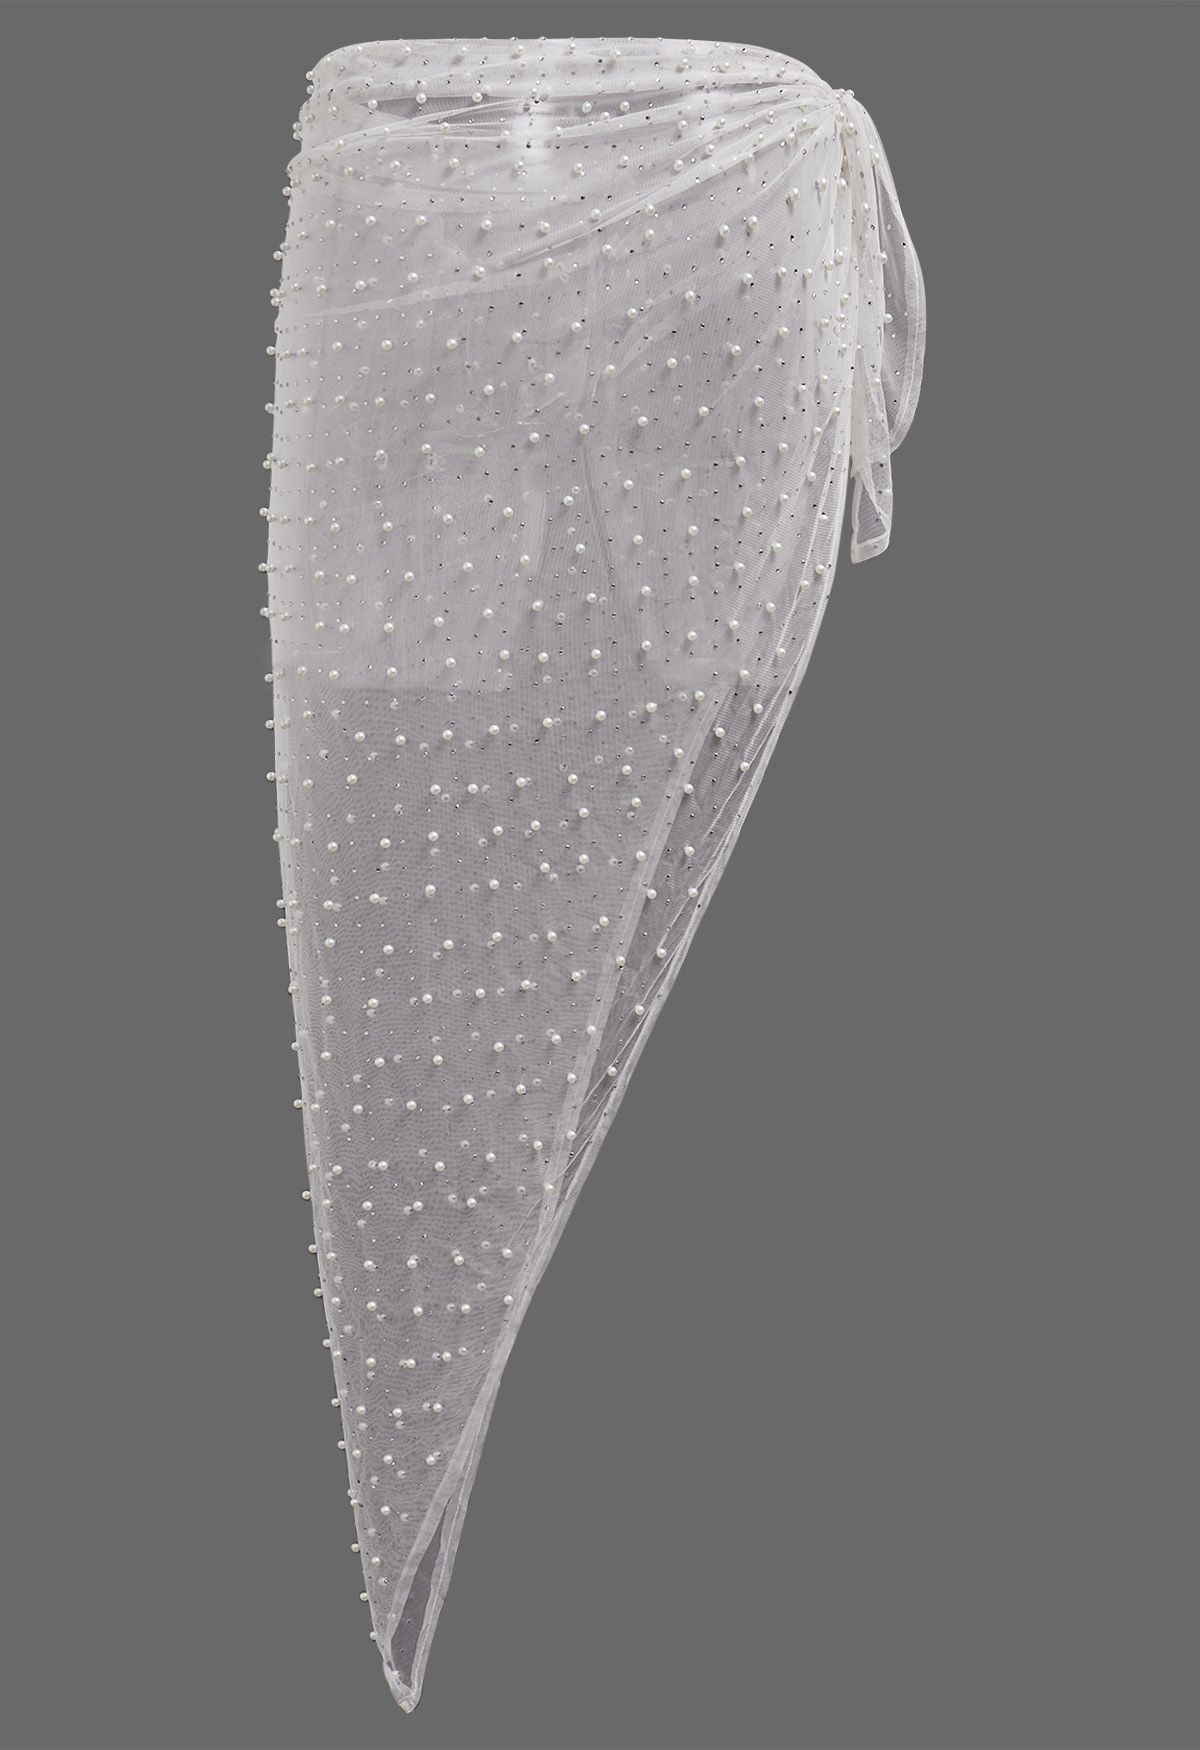 Pearl Mesh Self-Tie Sarong in White